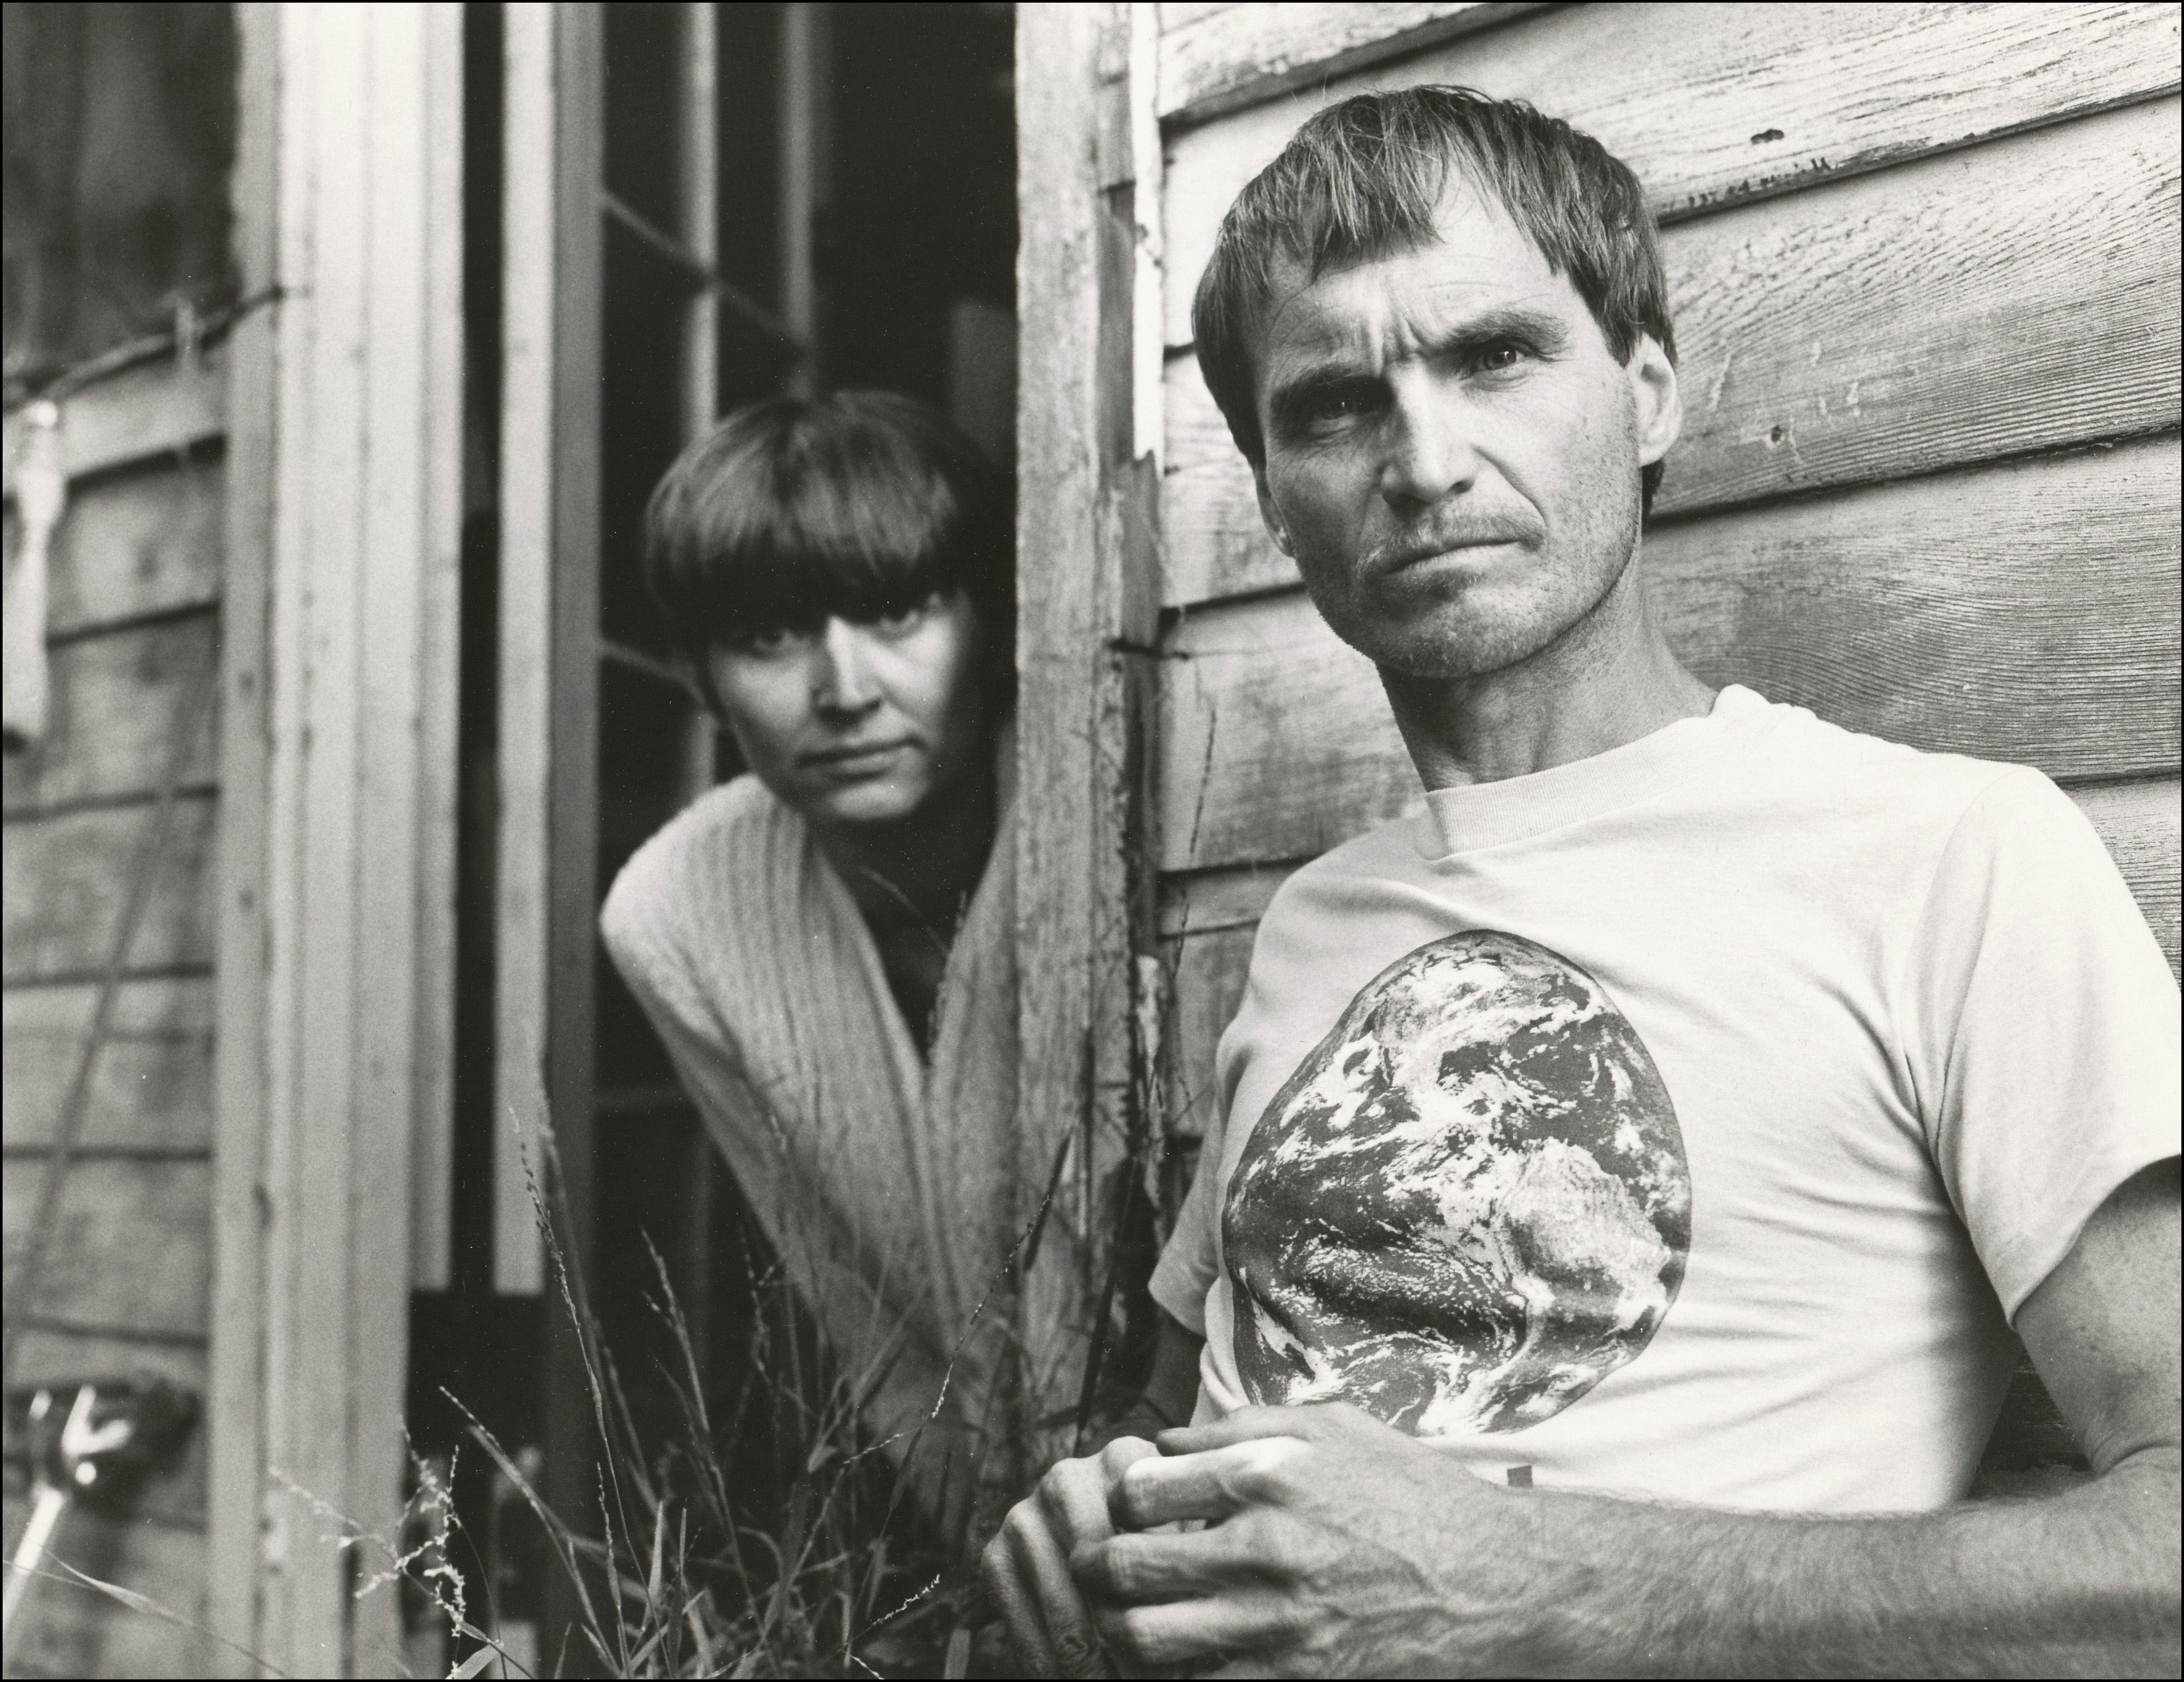 Man and woman looking at camera. Man in focus in front of wood house. Man wearing t-shirt with picture of the earth. Woman blurred in background looking out from door